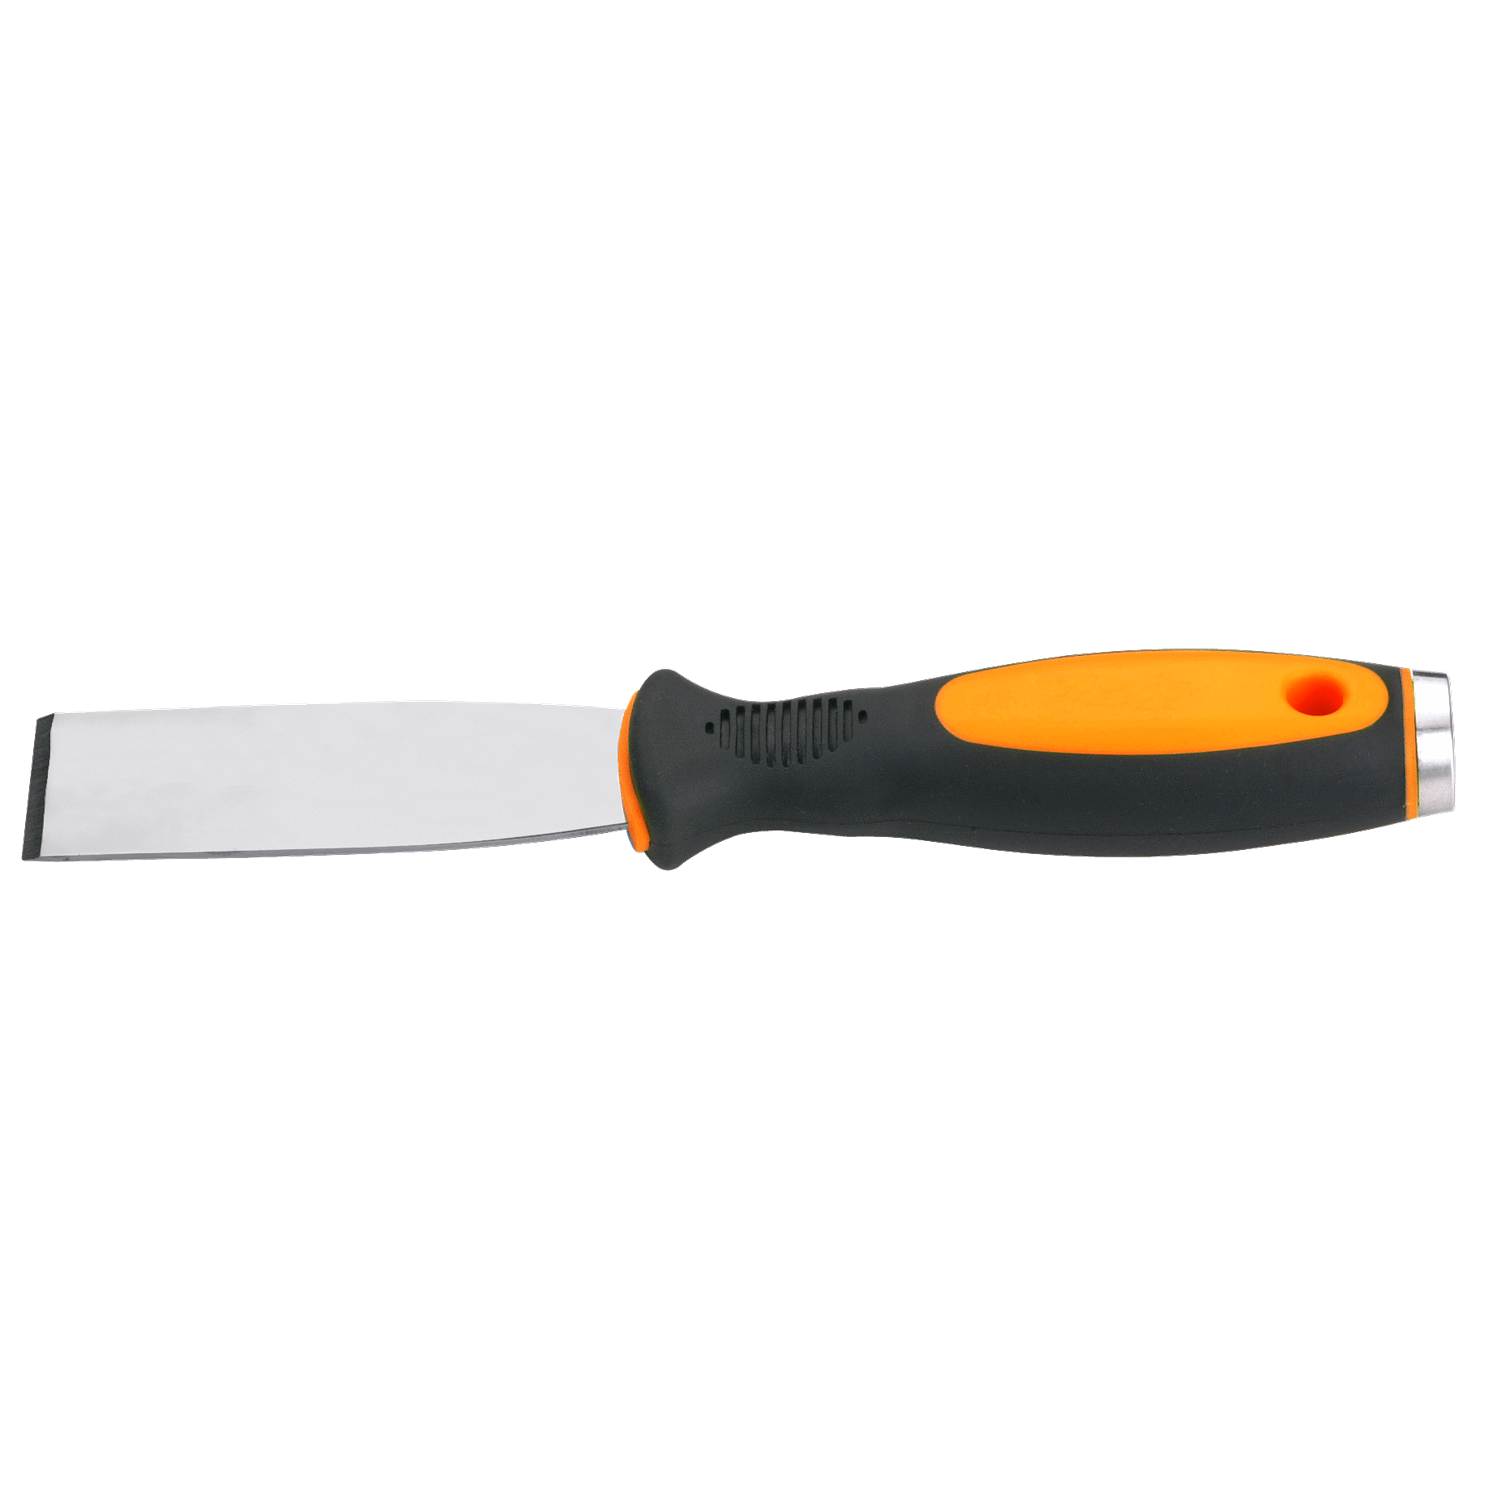 BAHCO 2489 Putty Knive with Stainless Steel Blade & Dual Handle - Premium Putty Knive from BAHCO - Shop now at Yew Aik.